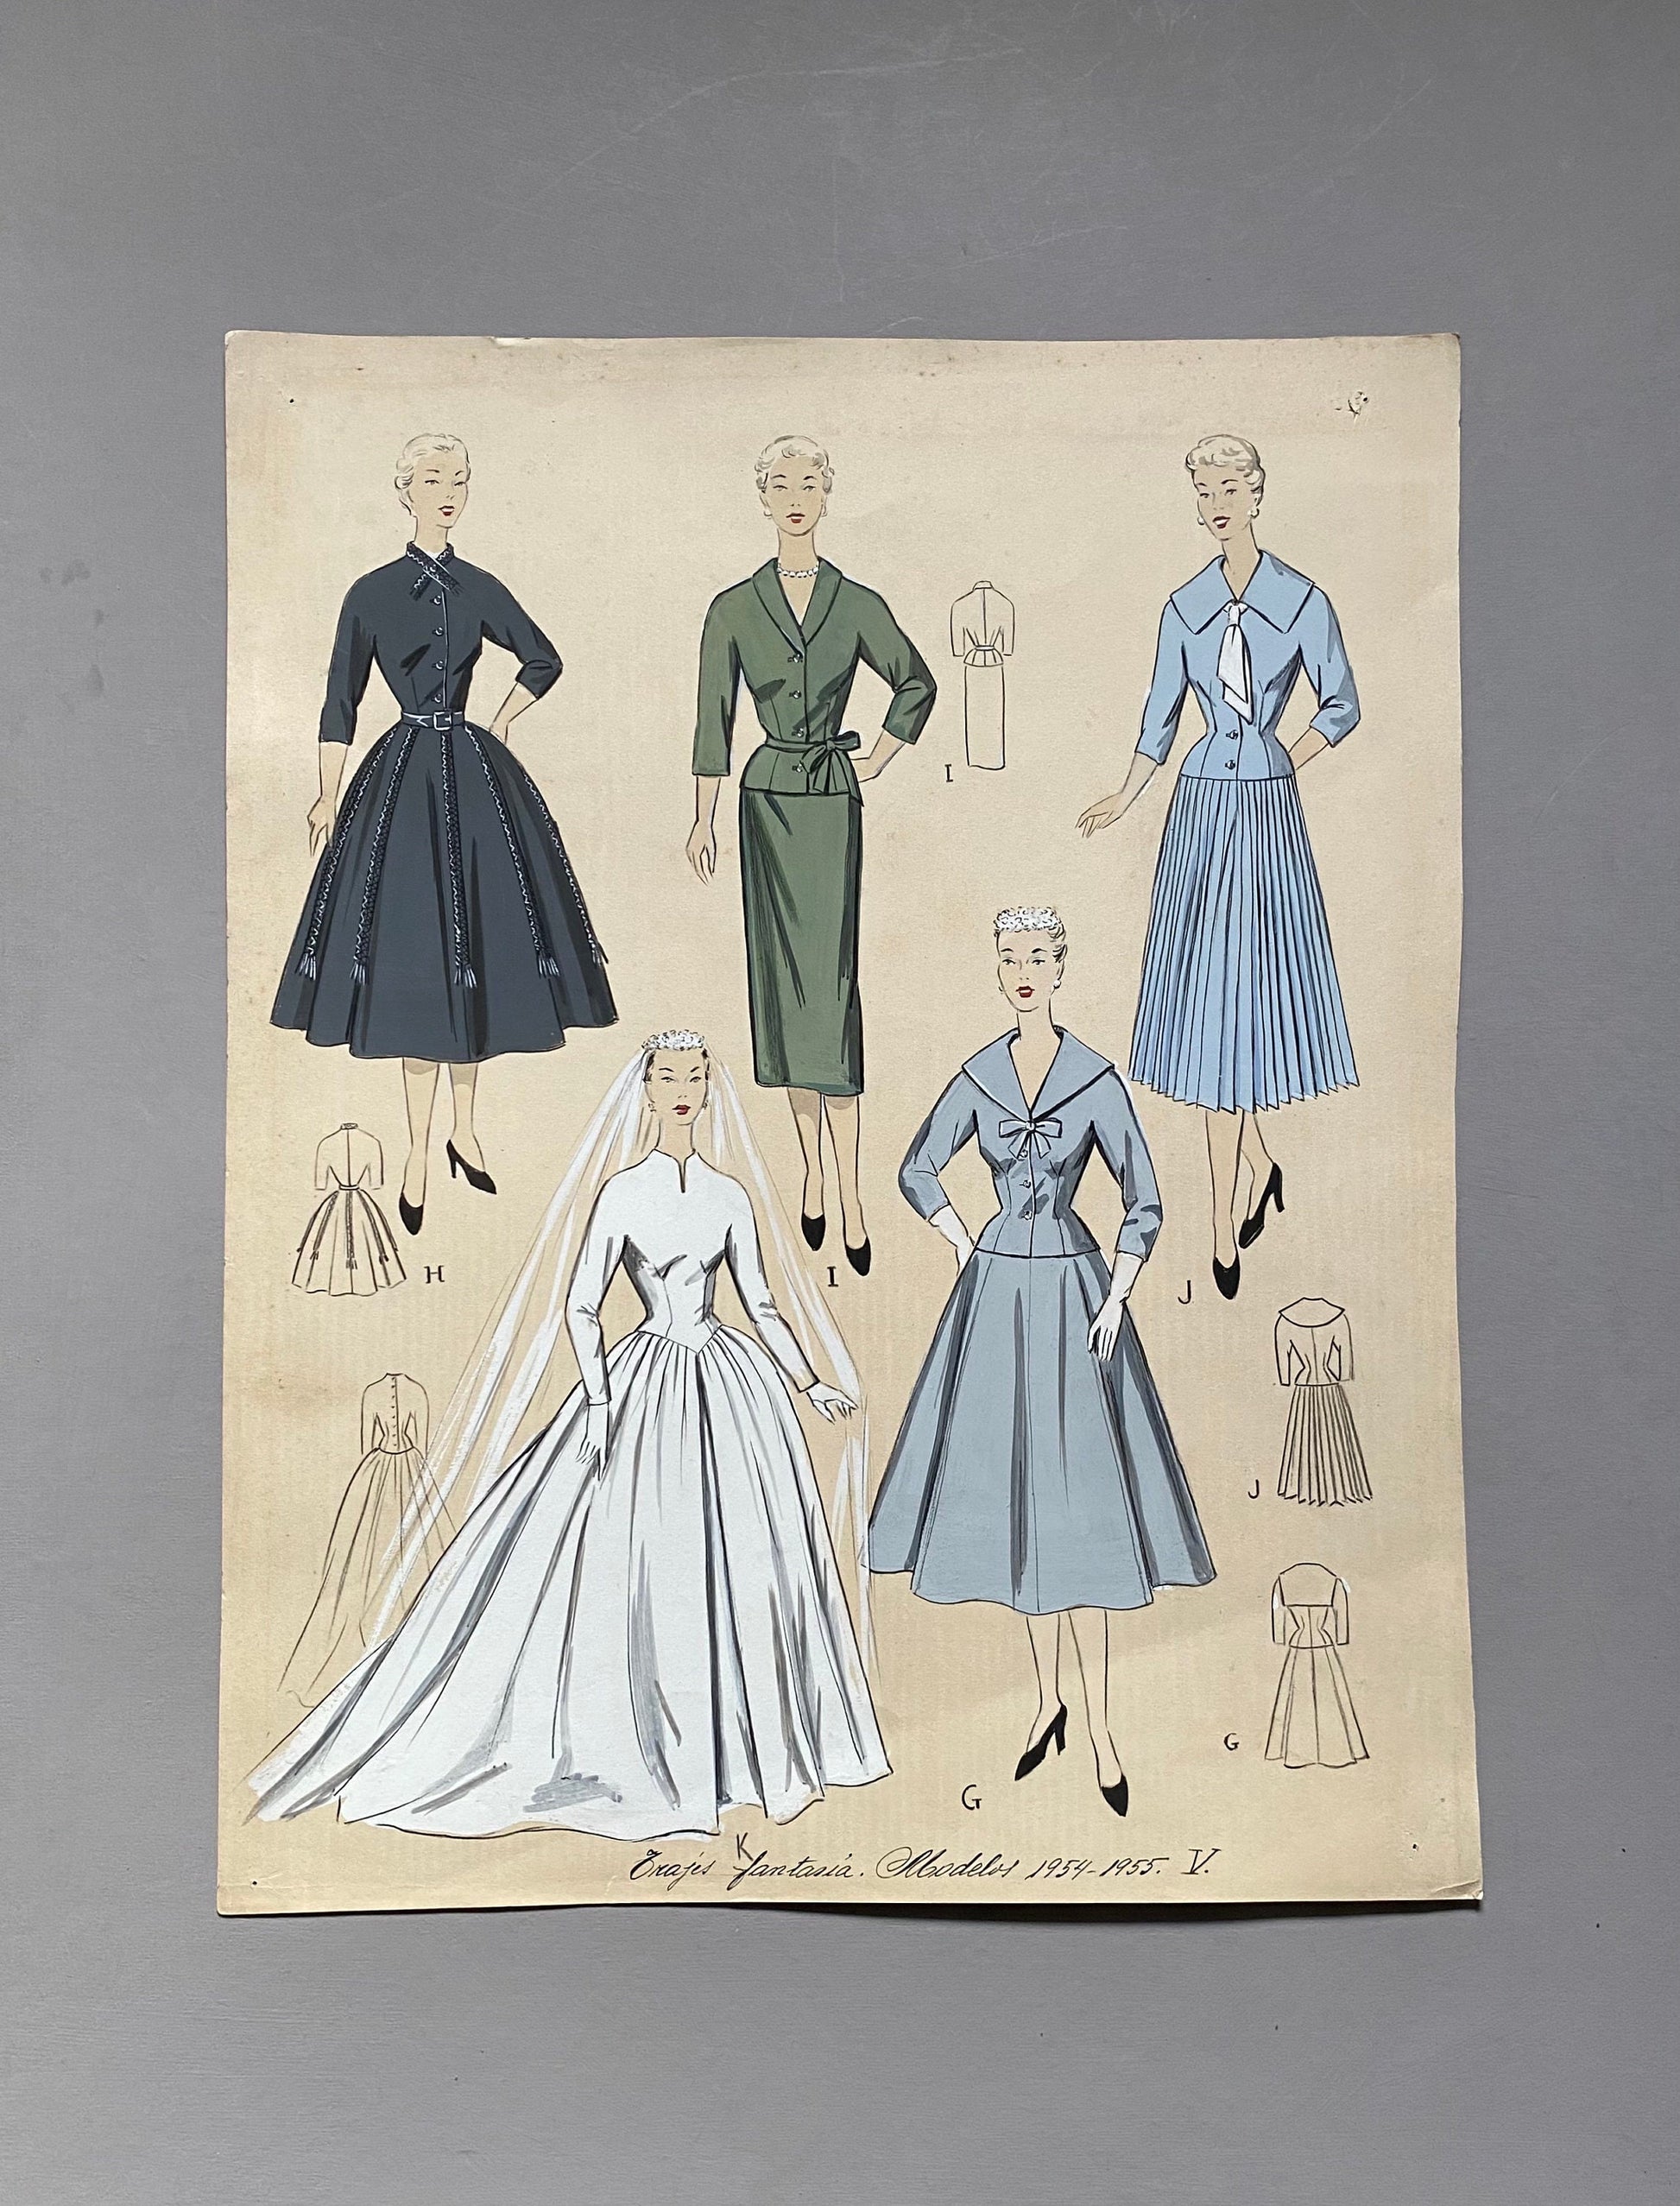 A Large Hand Drawn and Hand Painted Fashion Illustration. From Barcelona, Spain. 1955. Size: 51 x 40.5cms.